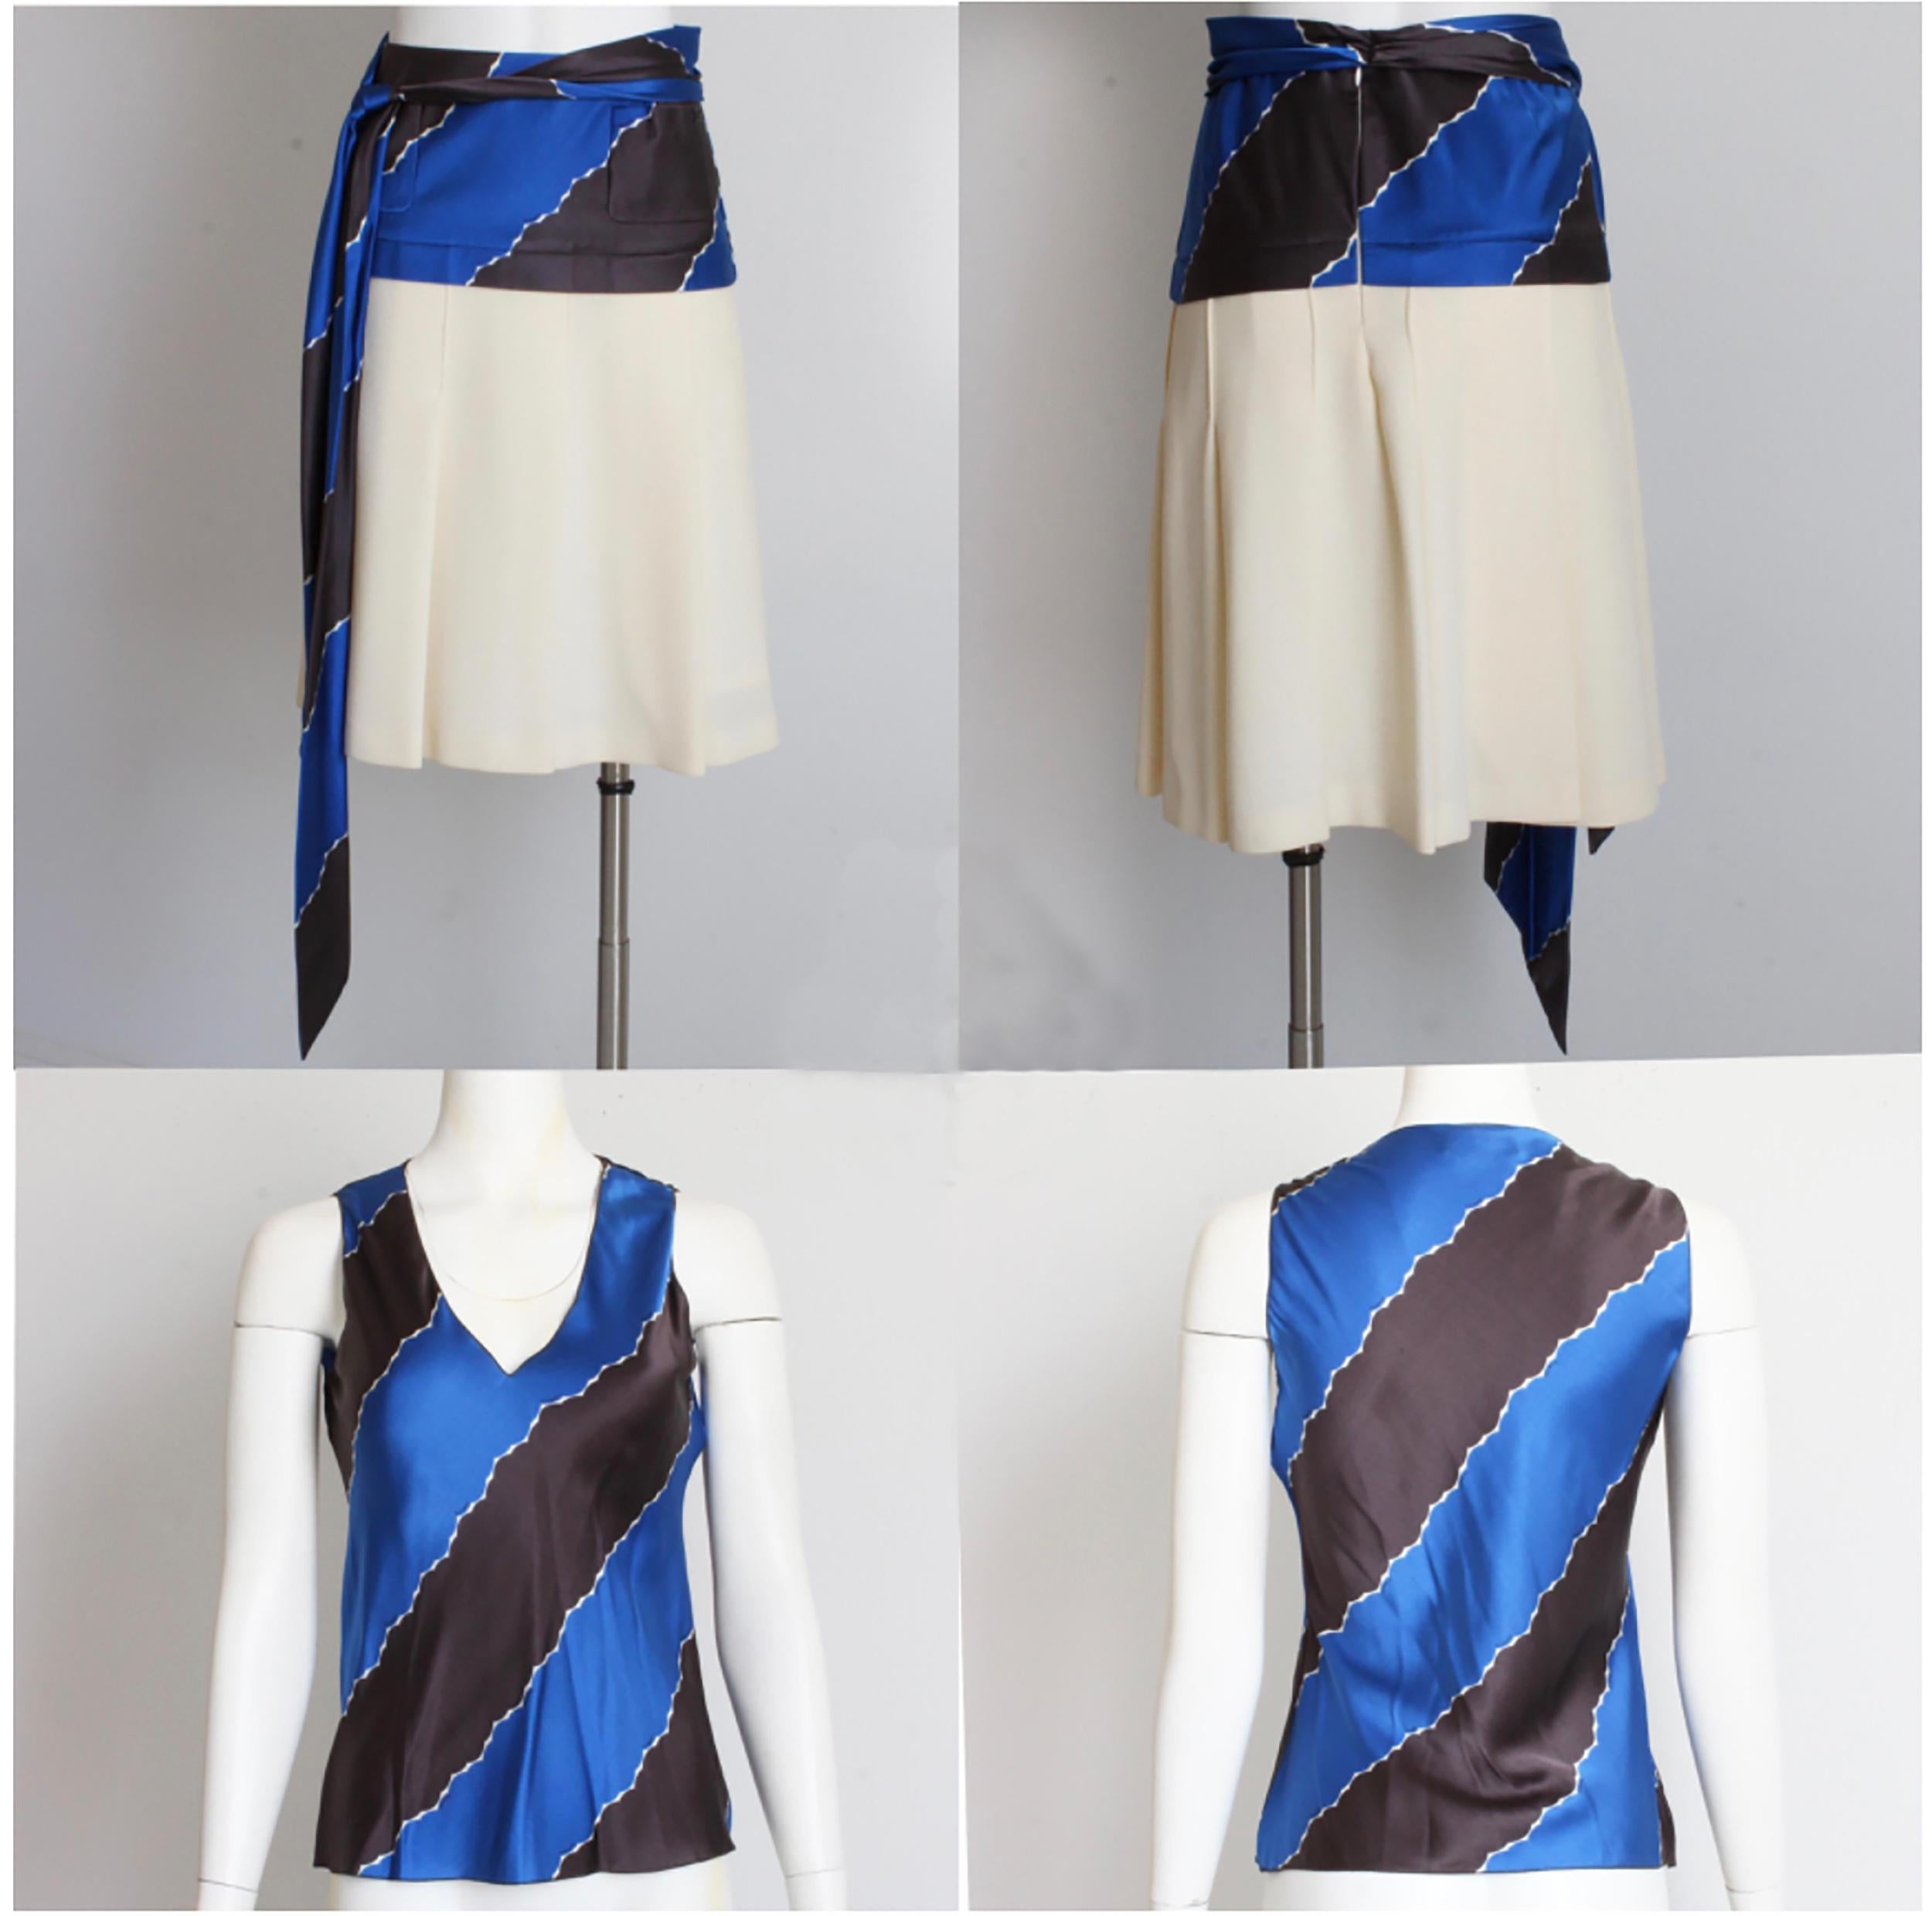 Chanel Silk Top + Pleated Skirt Set 2pc 05C Resort Collection Abstract Sz 36  en vente 2